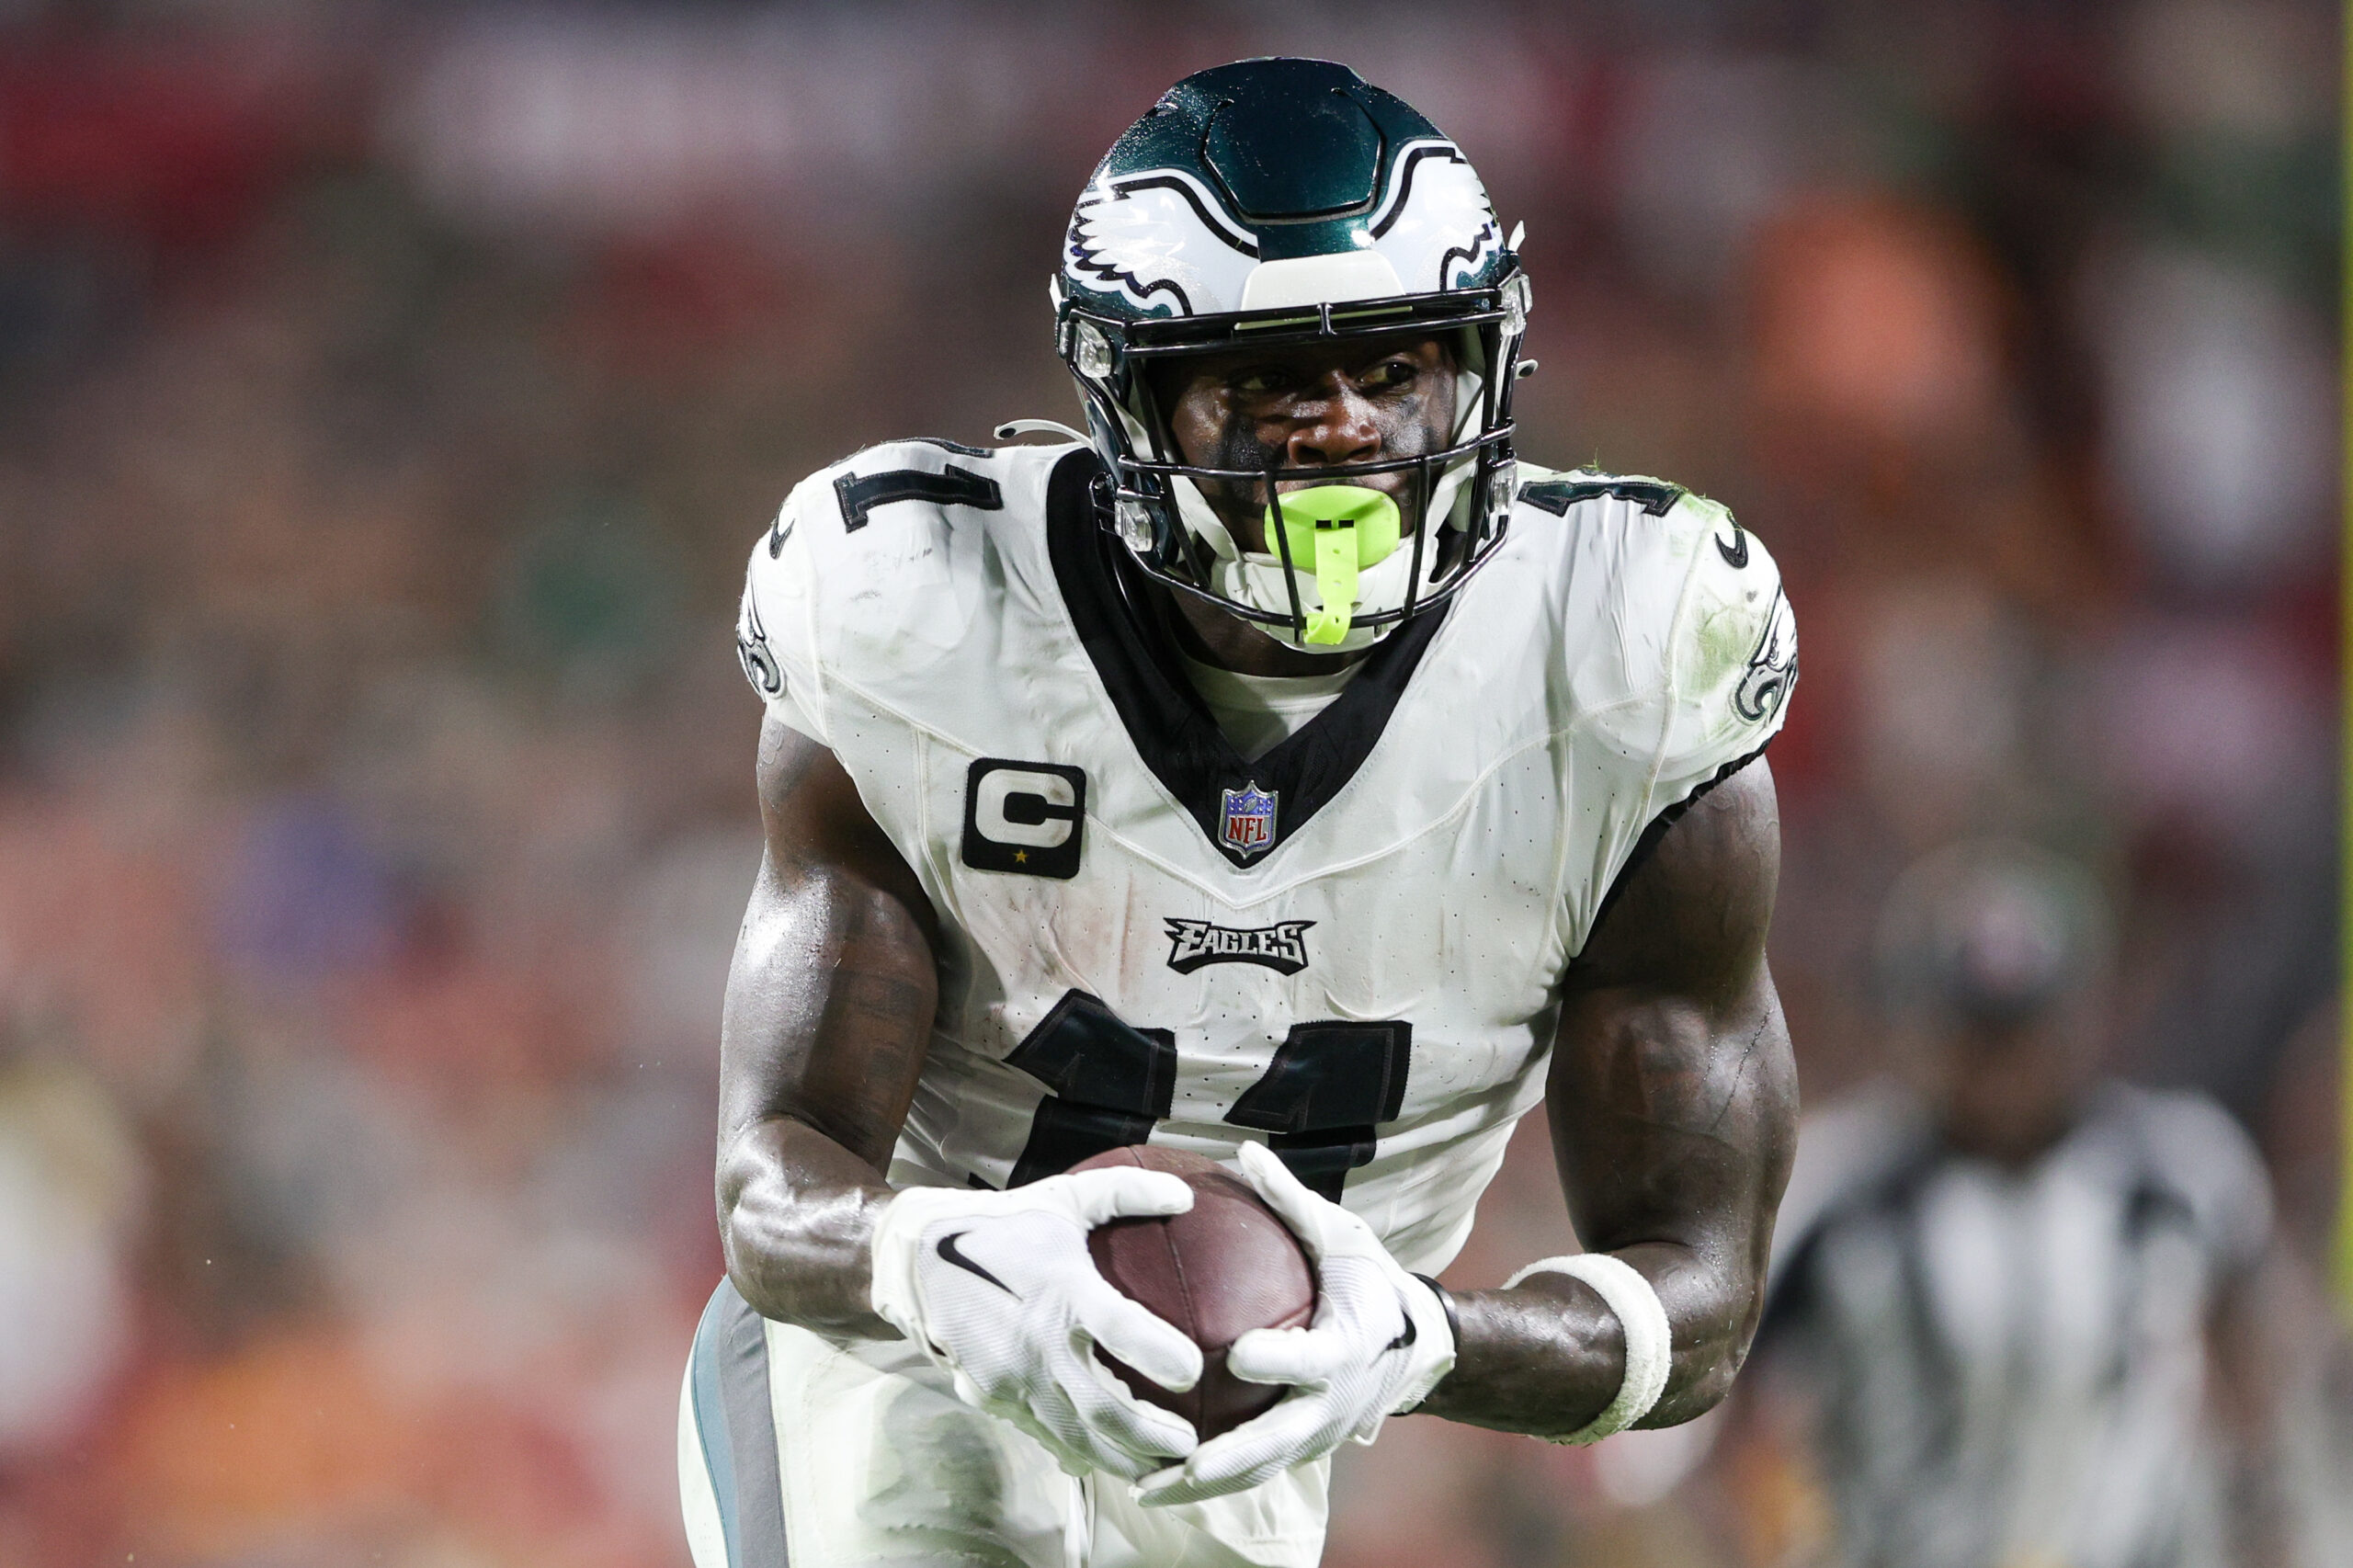 Getting receiver A.J. Brown was highlight of Eagles' draft